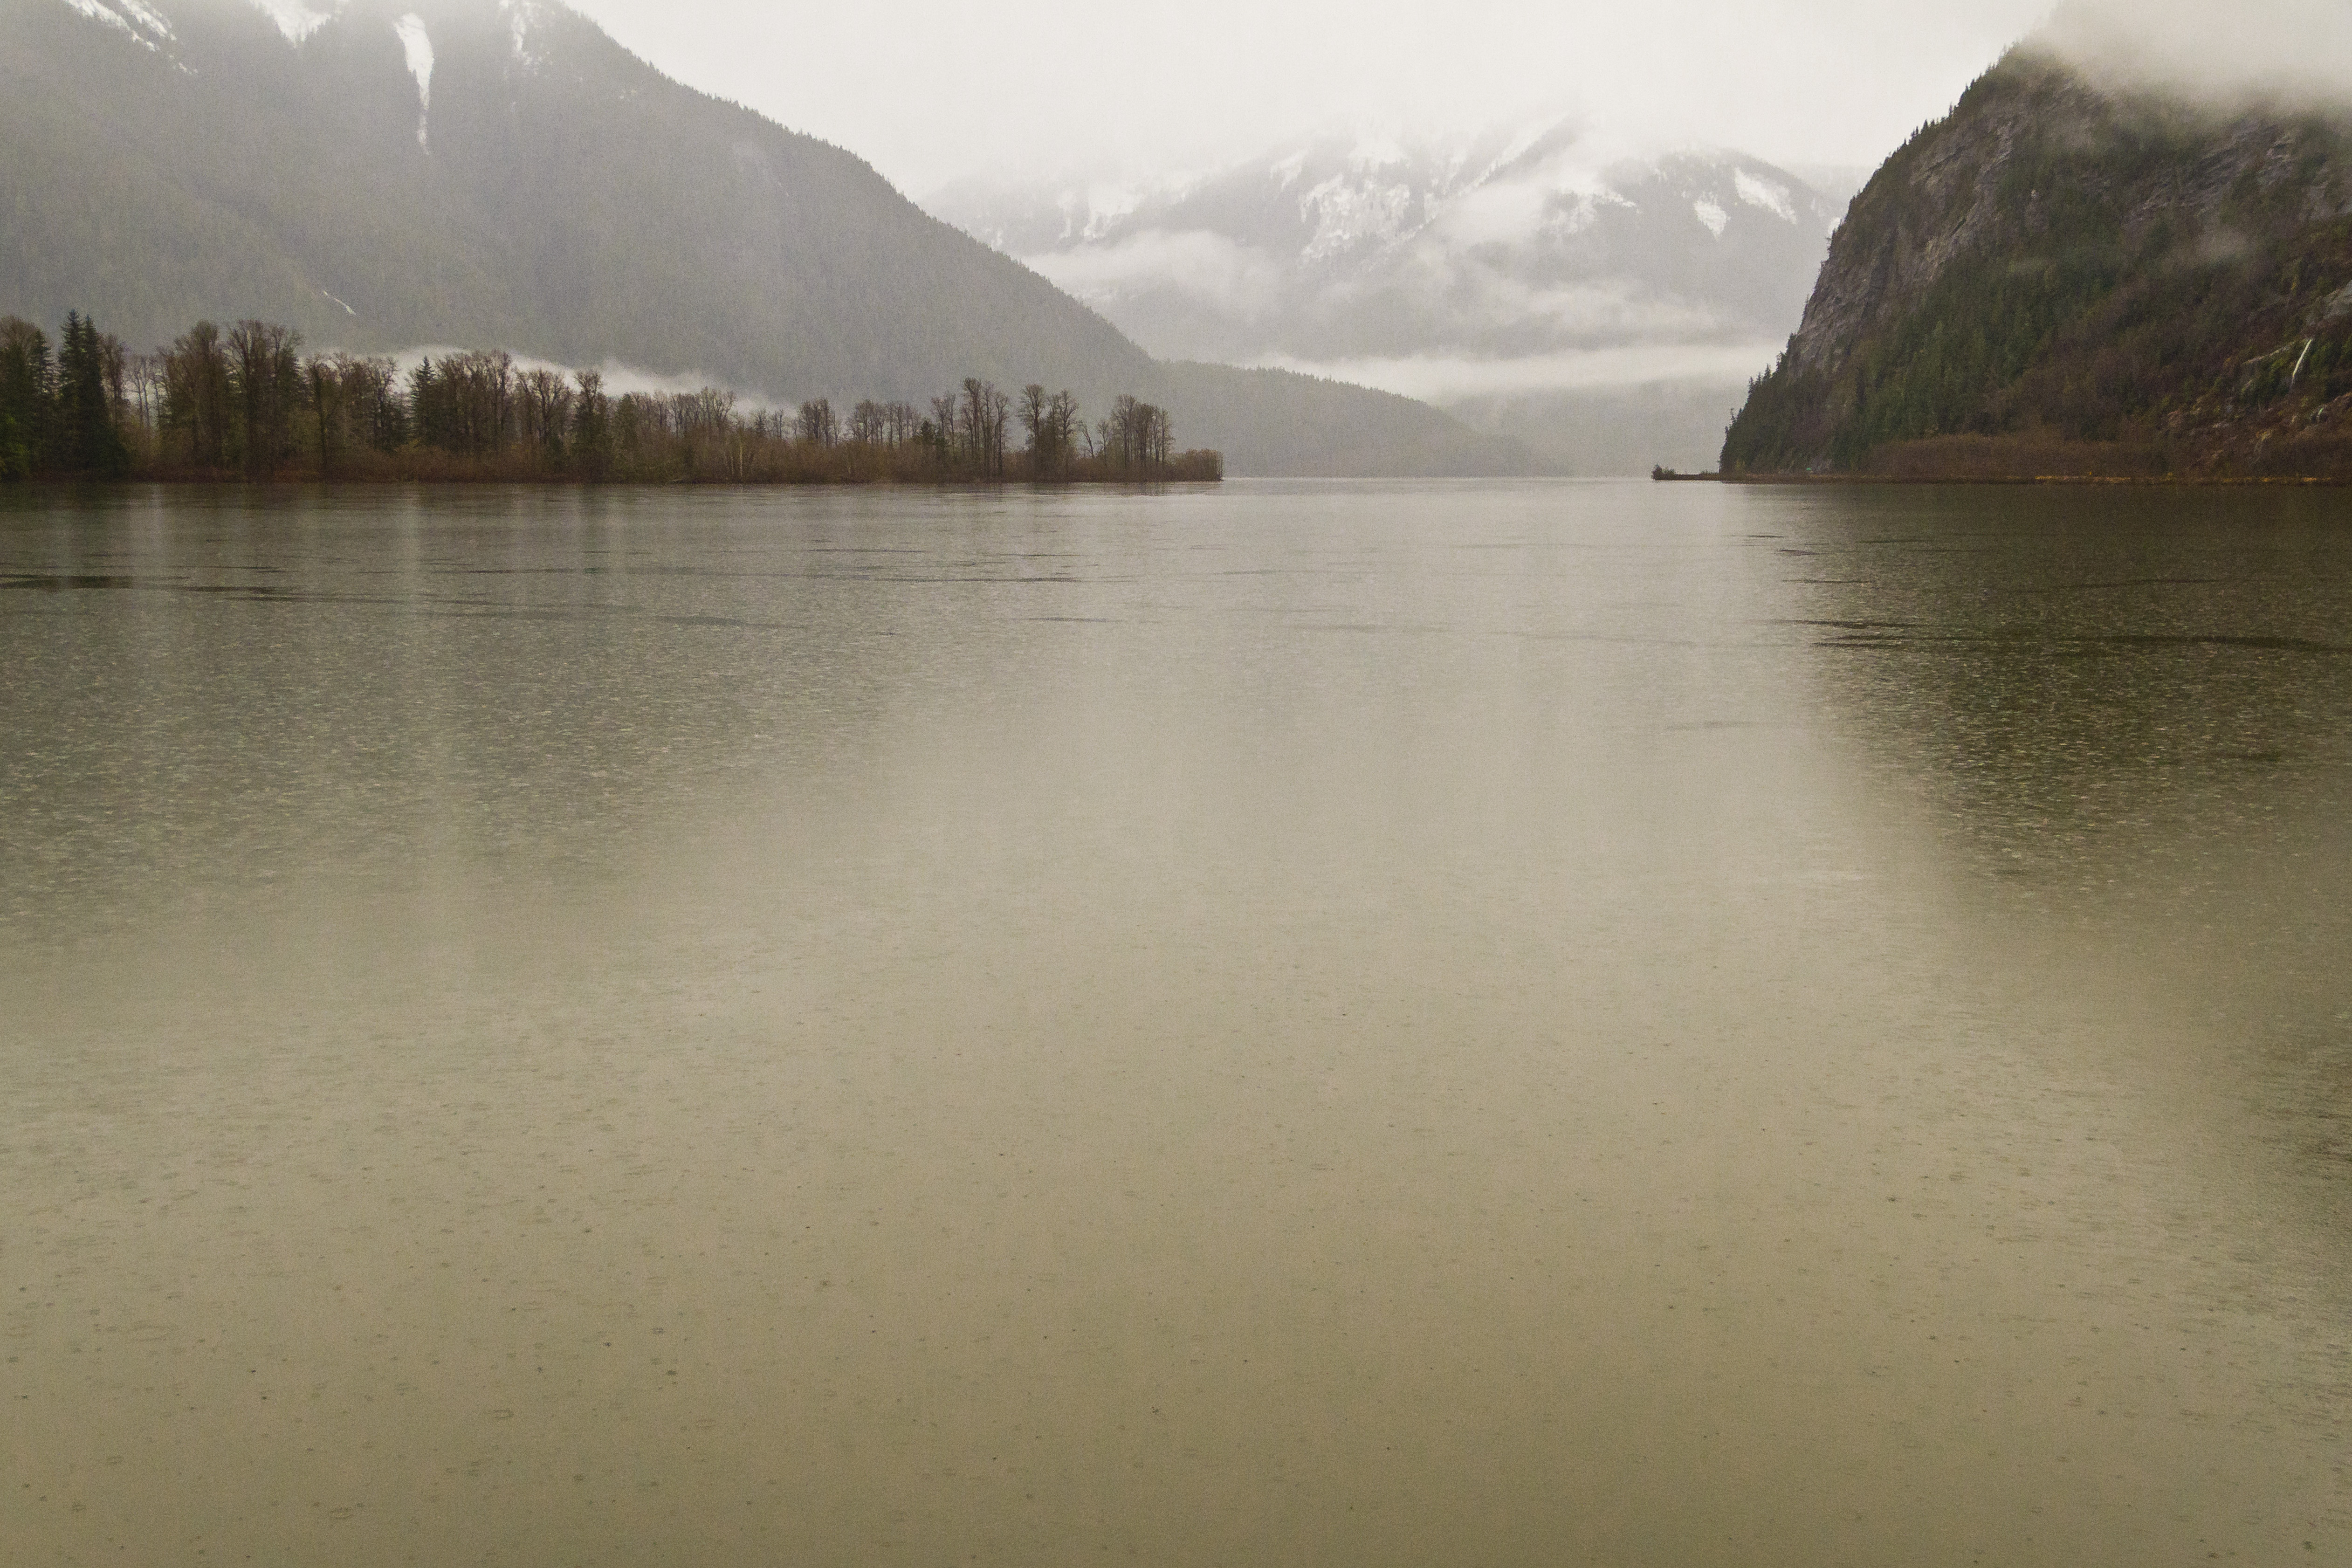 Skeena River, Photo: Mike R Turner (All Rights Reserved)